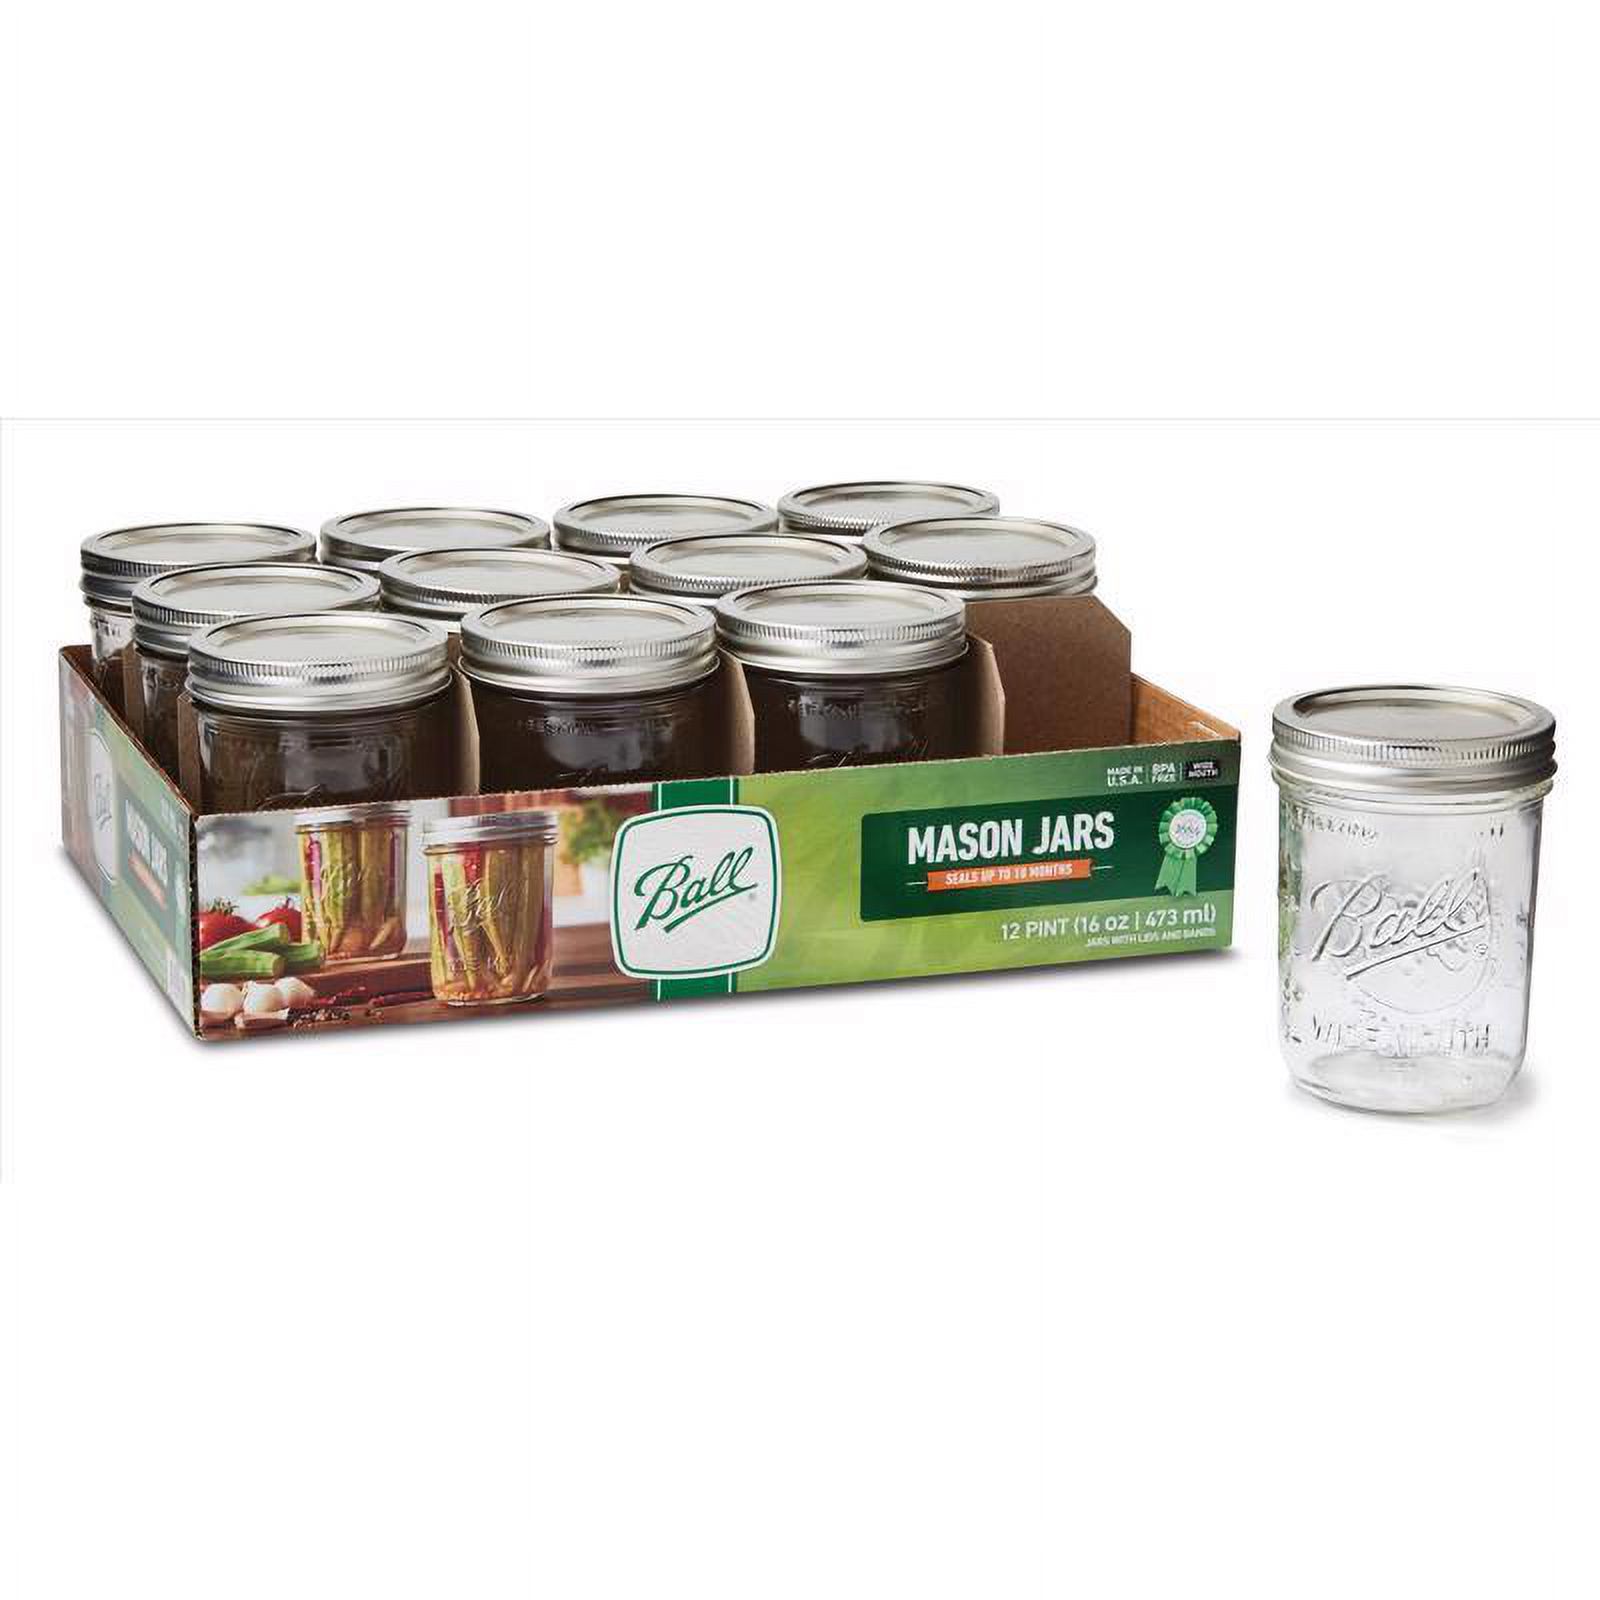 Ball, Glass Mason Jars with Lids & Bands, Wide Mouth, Clear, 16 oz, 12 Count - image 5 of 7